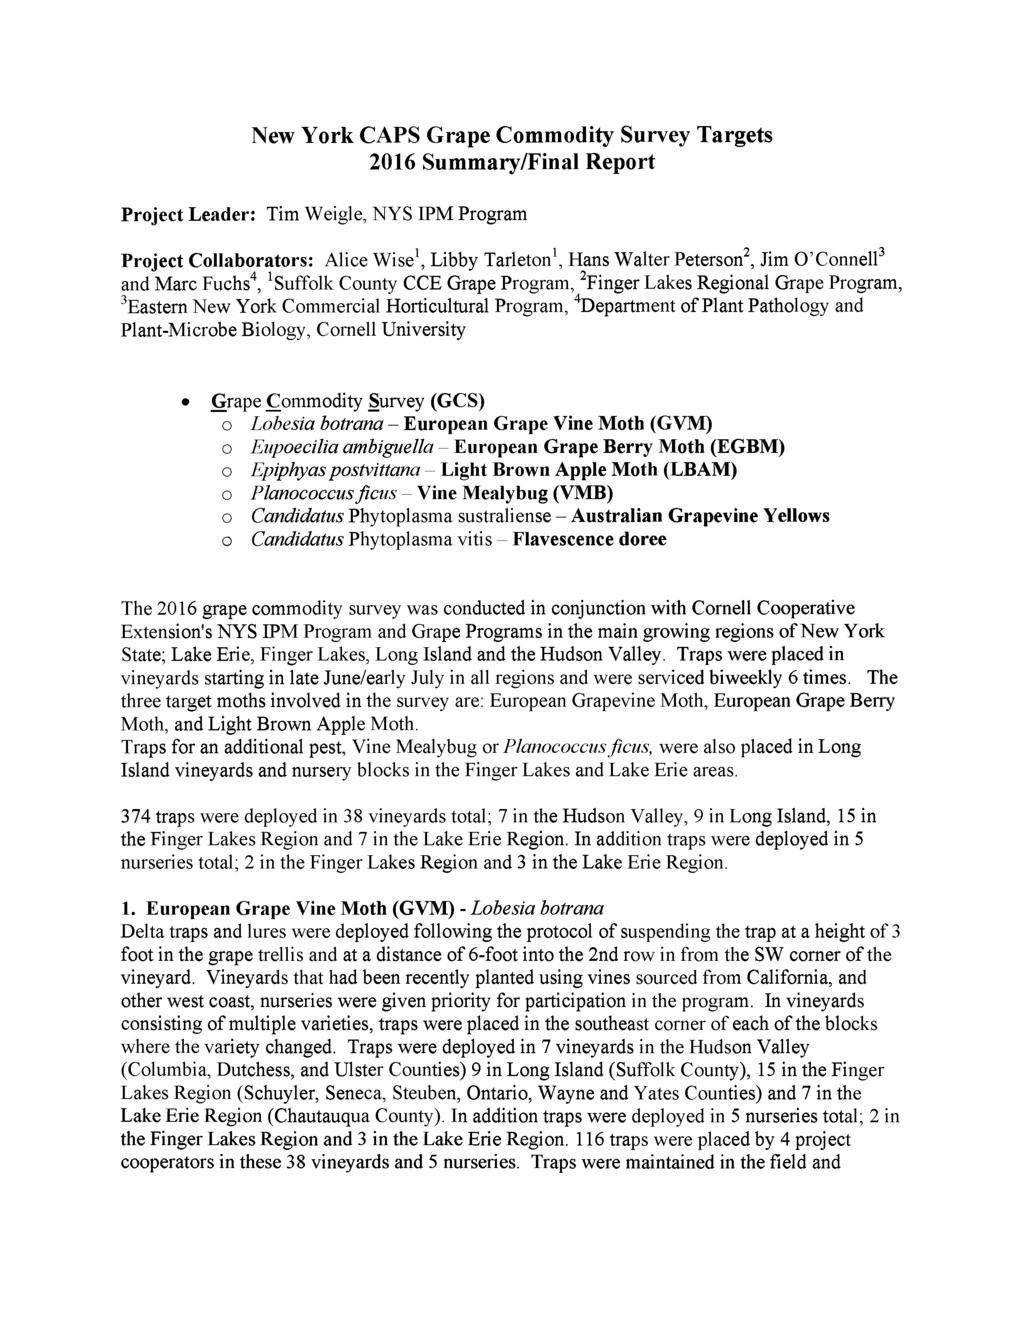 New York CAPS Grape Commodity Survey Targets 2016 Summary/Final Report Project Leader: Tim Weigle, NYS IPM Program Project Collaborators: Alice Wise1, Libby Tarleton1, ans Walter Peterson2, Jim O